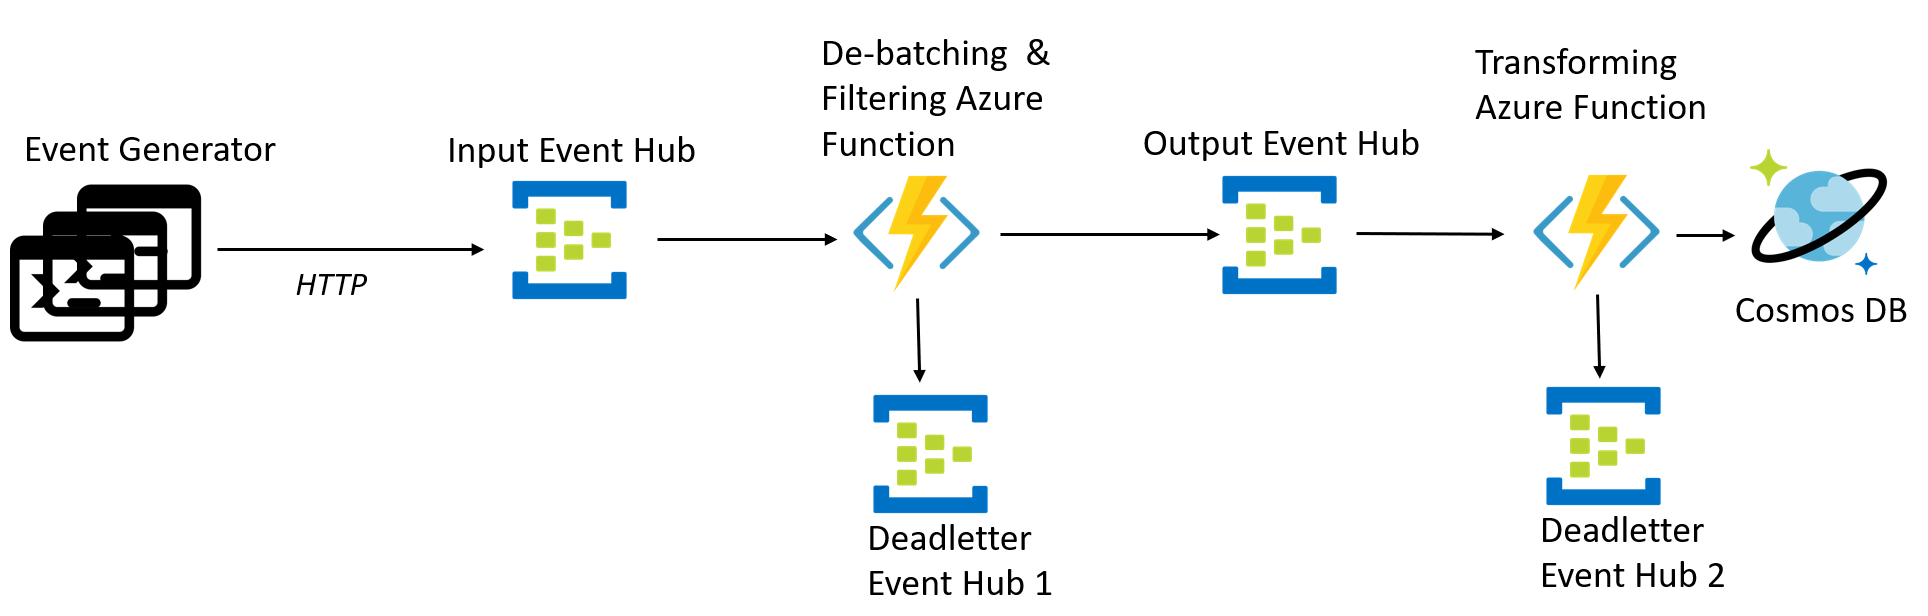 Diagram showing the data flow and key processing points in the architecture described in this article